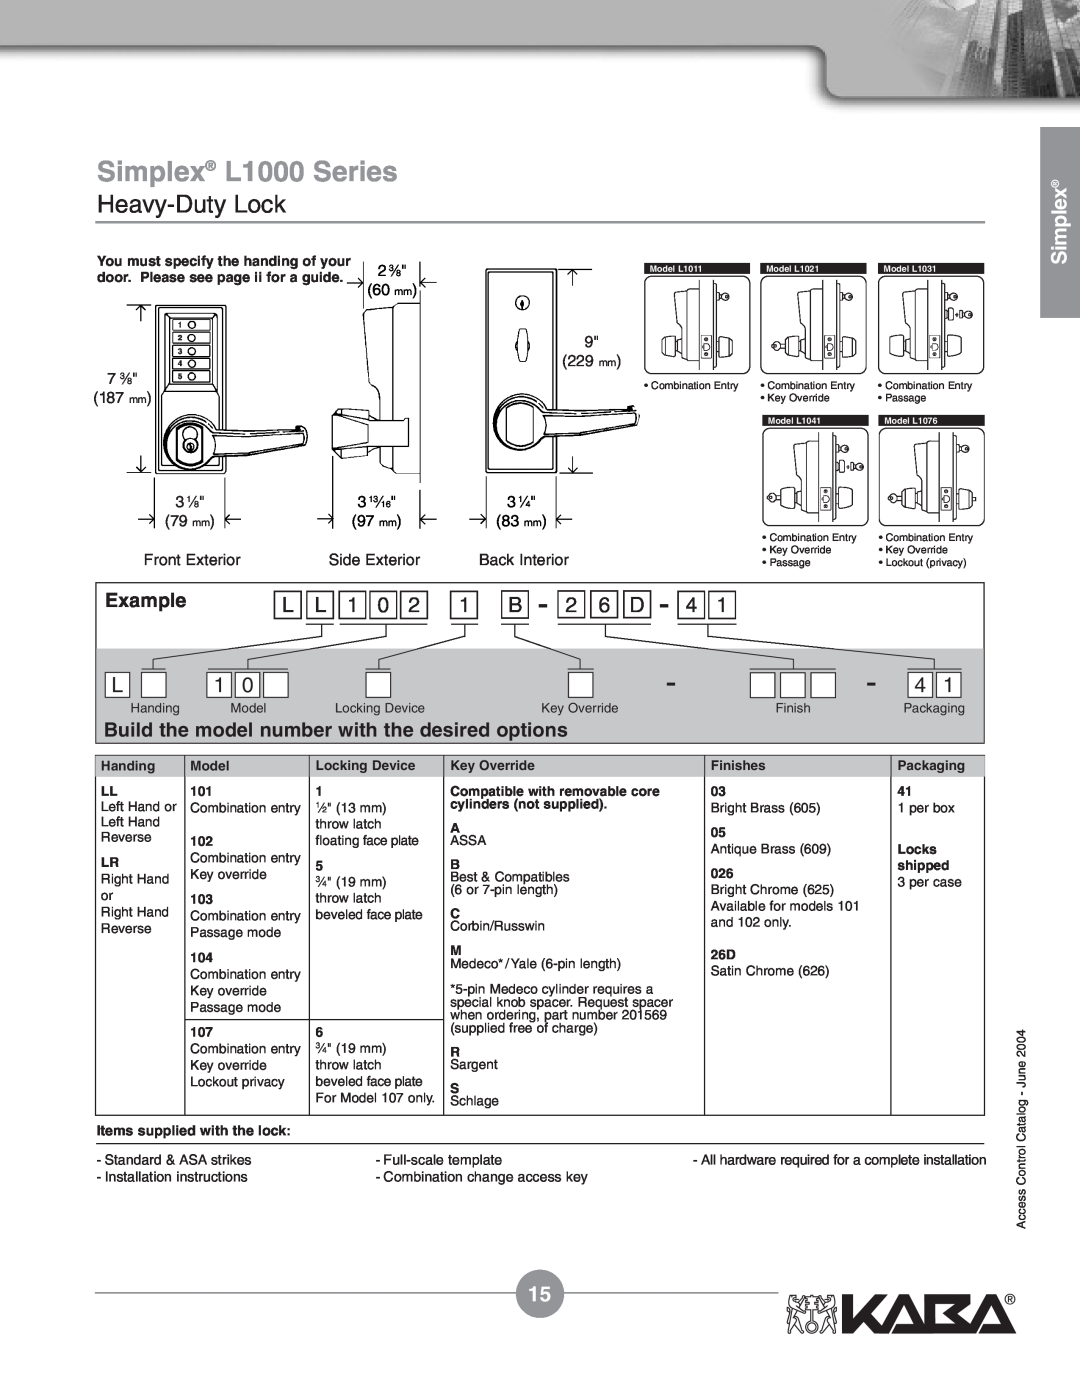 Assa Mechanical Pushbutton Locks manual Simplex L1000 Series, Heavy-Duty Lock, Example, Items supplied with the lock 